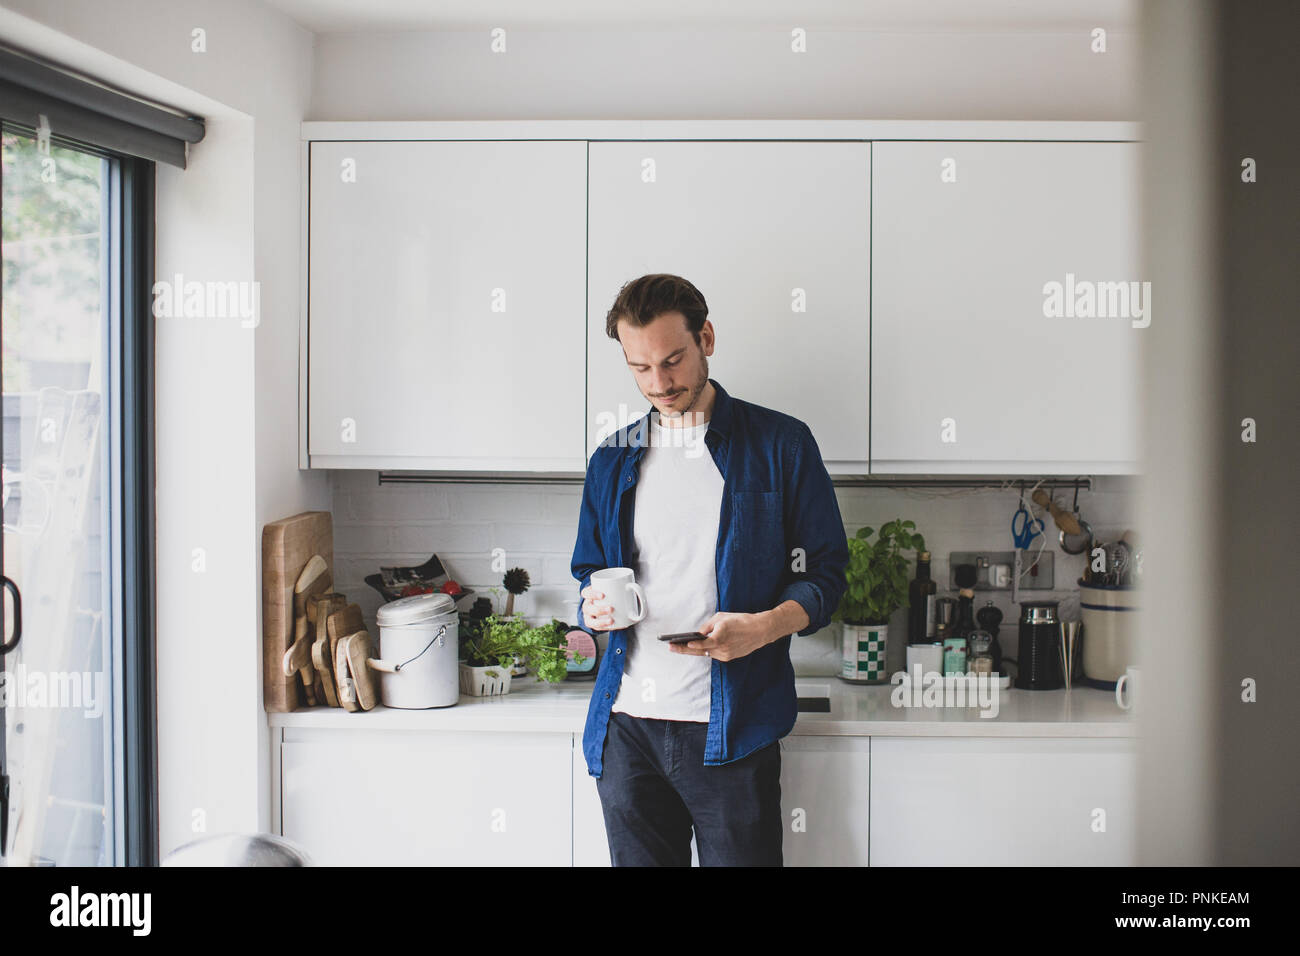 Adult male checking smartphone in kitchen with mug of coffee Stock Photo